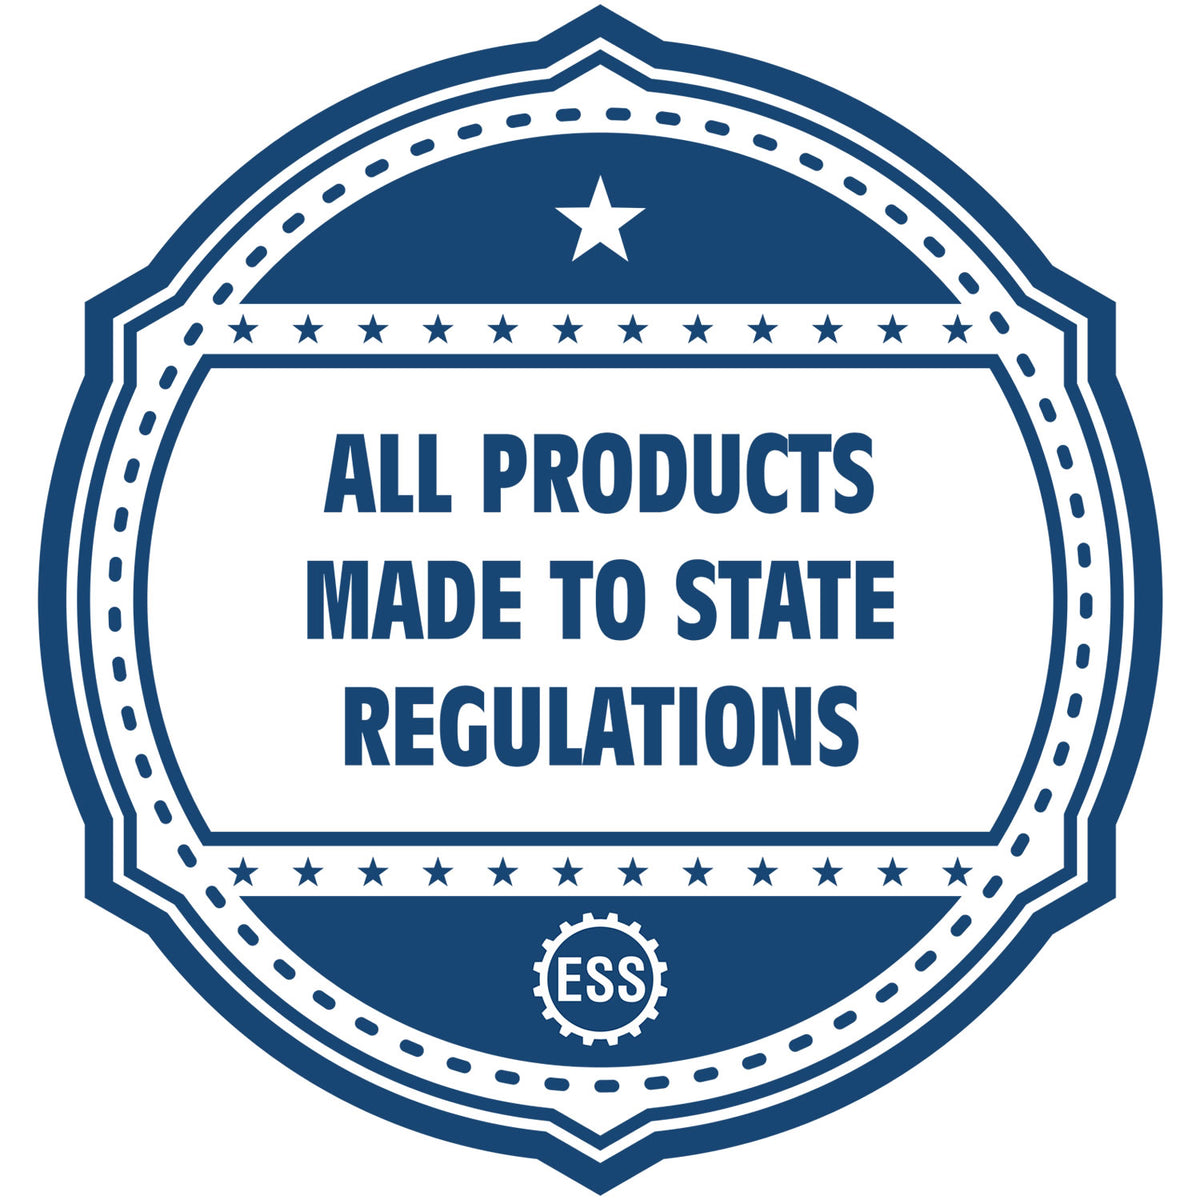 An icon or badge element for the Super Slim Michigan Notary Public Stamp showing that this product is made in compliance with state regulations.